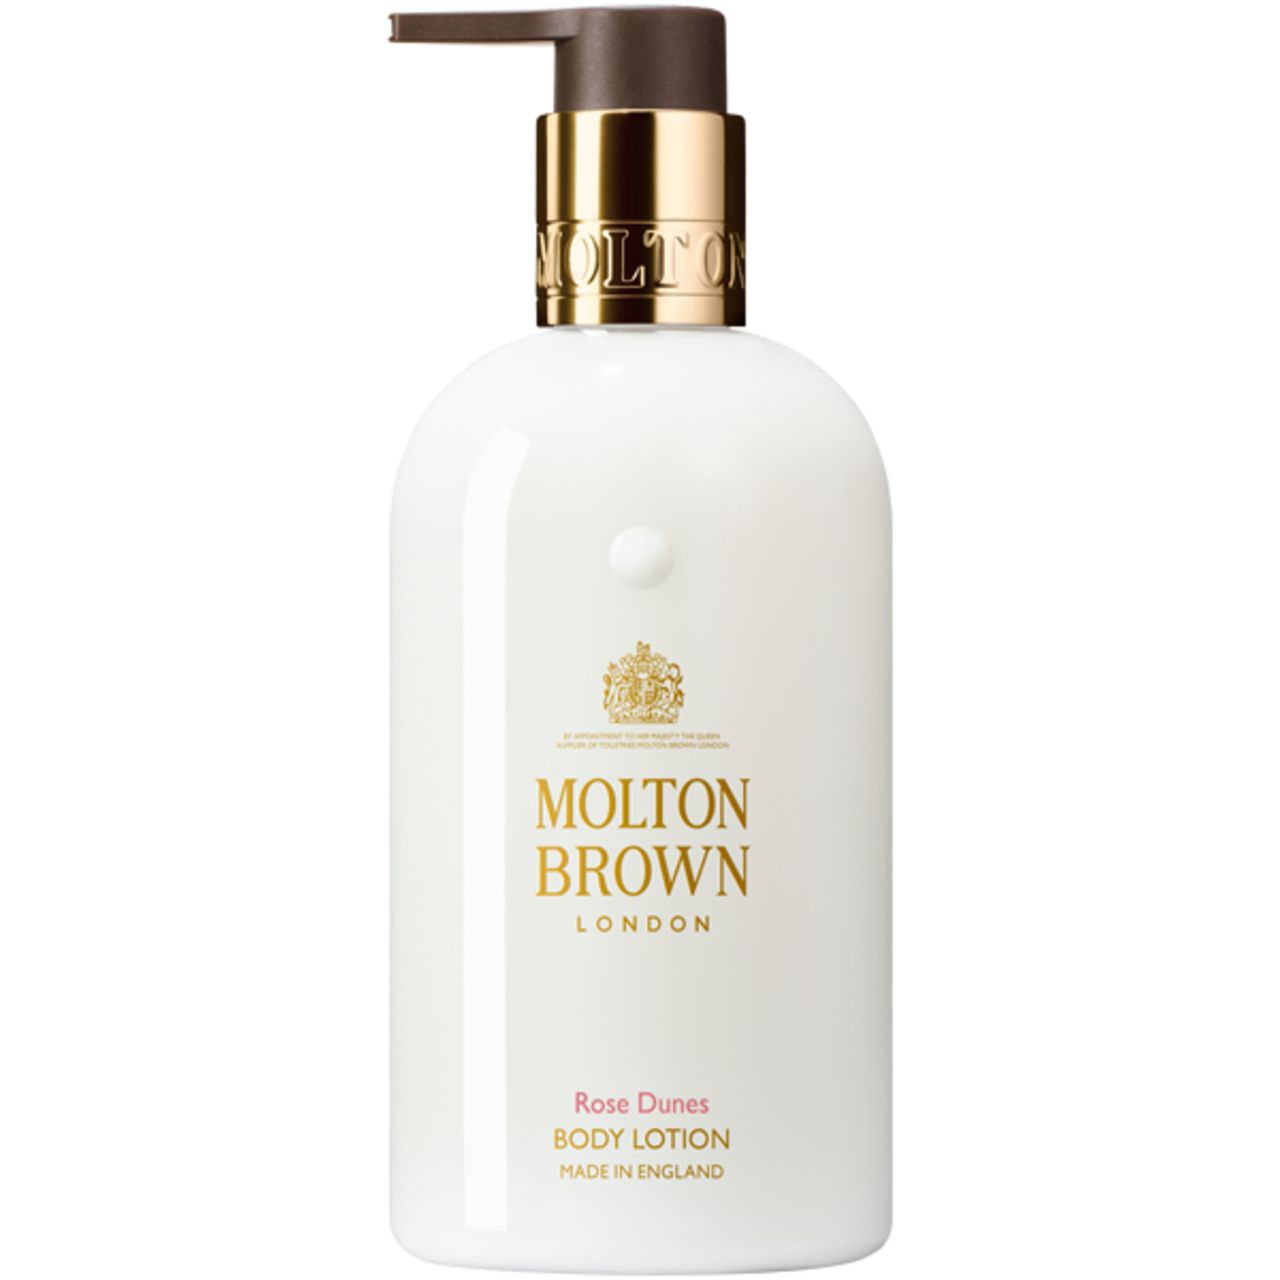 Molton Brown, Rose Dunes Body Lotion